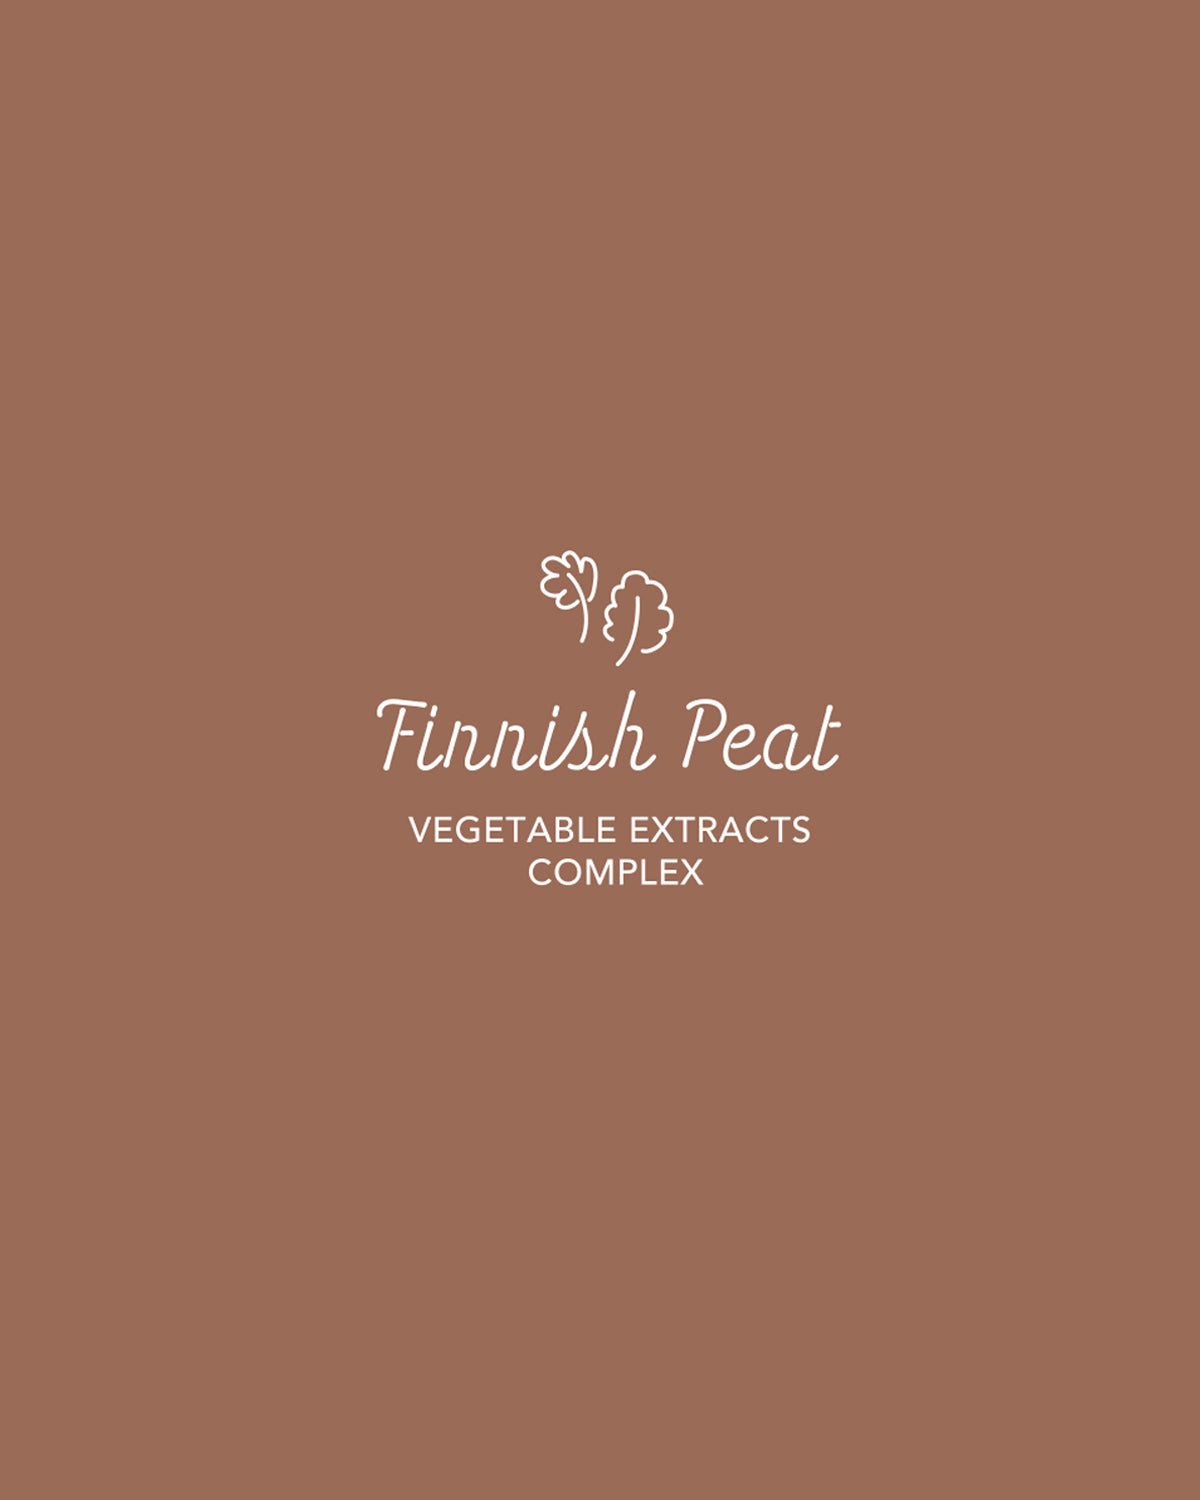 Finnish Peat!  Deep Clean Wash Off peat Mask formulated with 5% of original peat from Finland gently absorbs excess oil and impurities.   The Peat helps to tighten the appearance of pores and dissolve dead skin cells. 